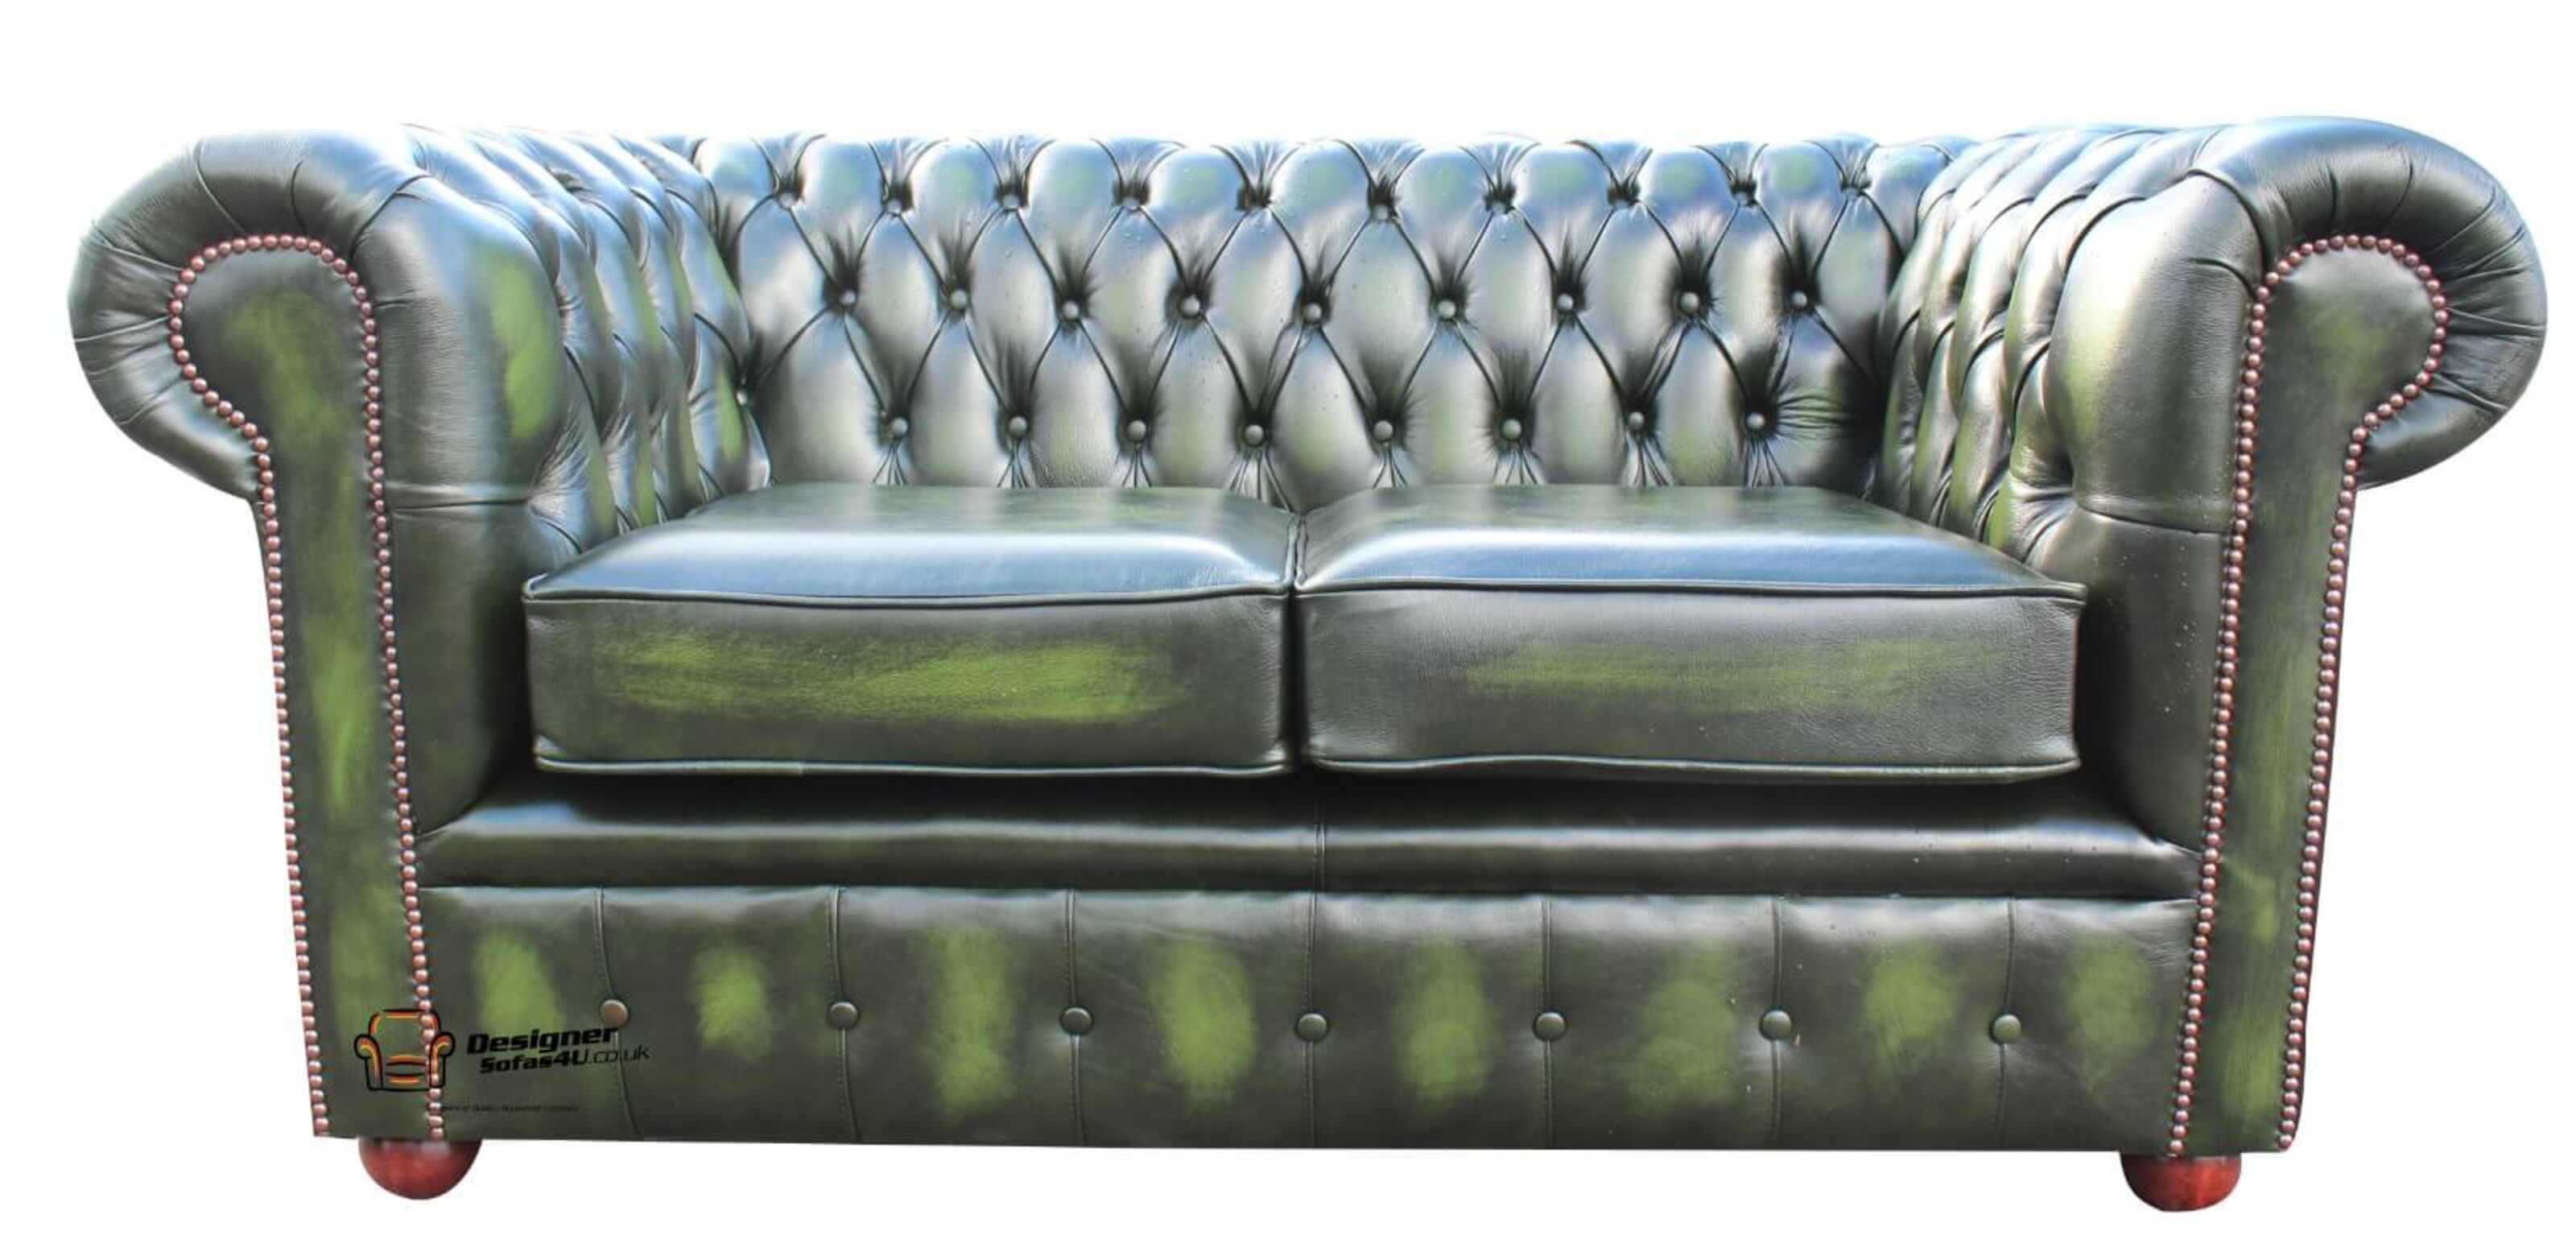 Discover Chesterfield Sofas at Clapham Junction  %Post Title